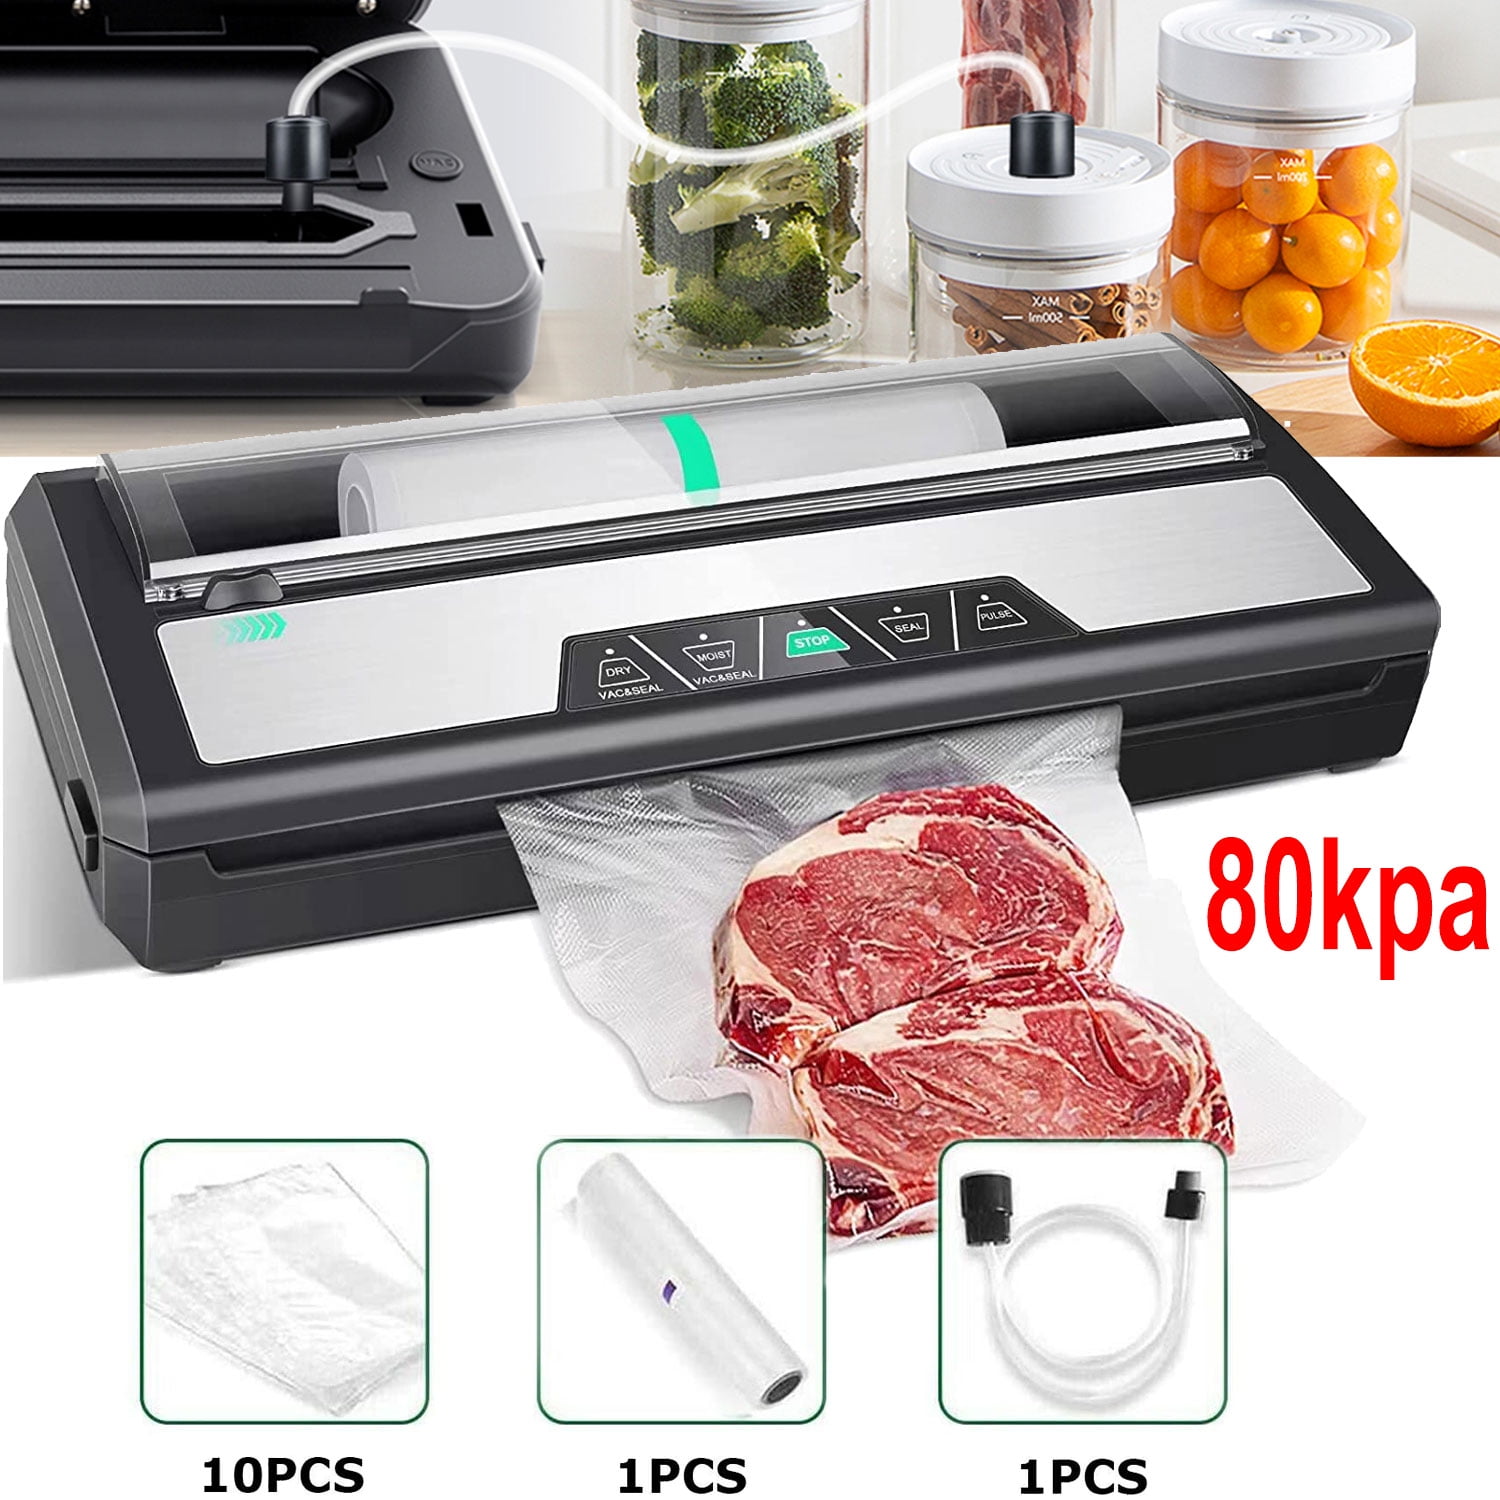 Avid Armor - Chamber Vacuum Sealer Machine USV32 Ultra Series, Food for Wet  Foods, Meat Sealers Packing Machine, Compact with 11.5 -Inch Bar